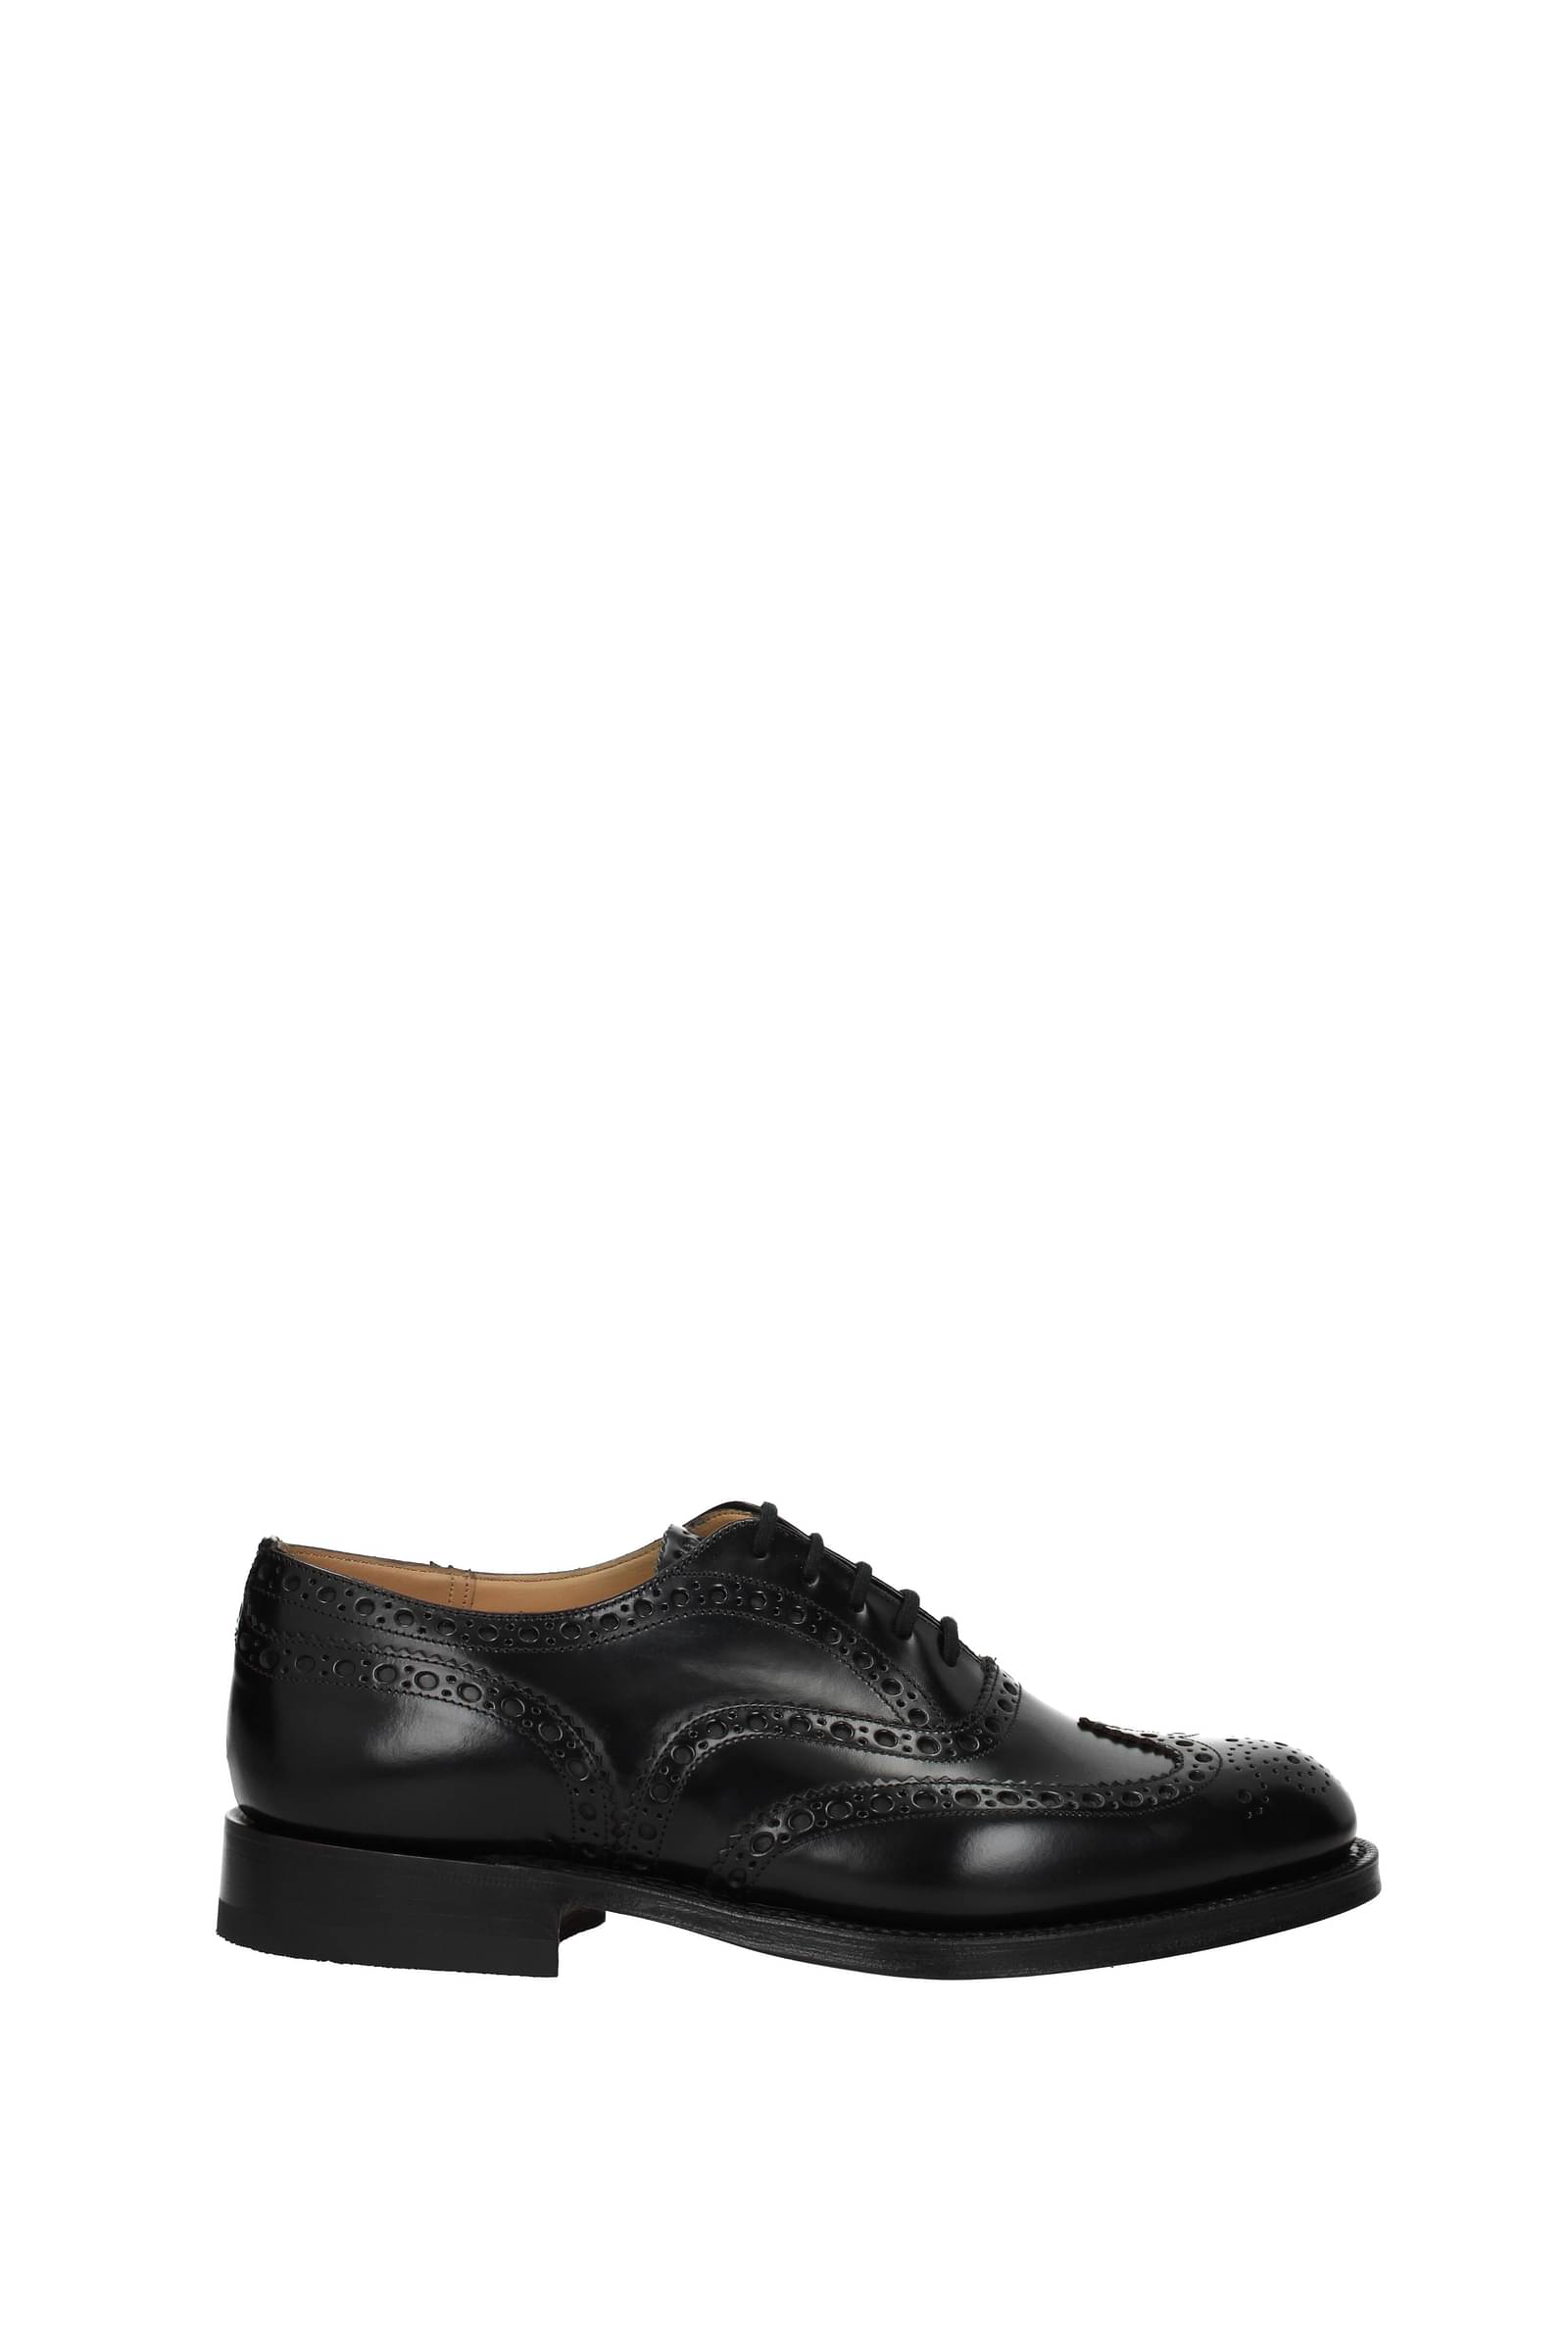 Buy Burwood Black Lace Up Leather Formal Shoes online | Looksgud.in